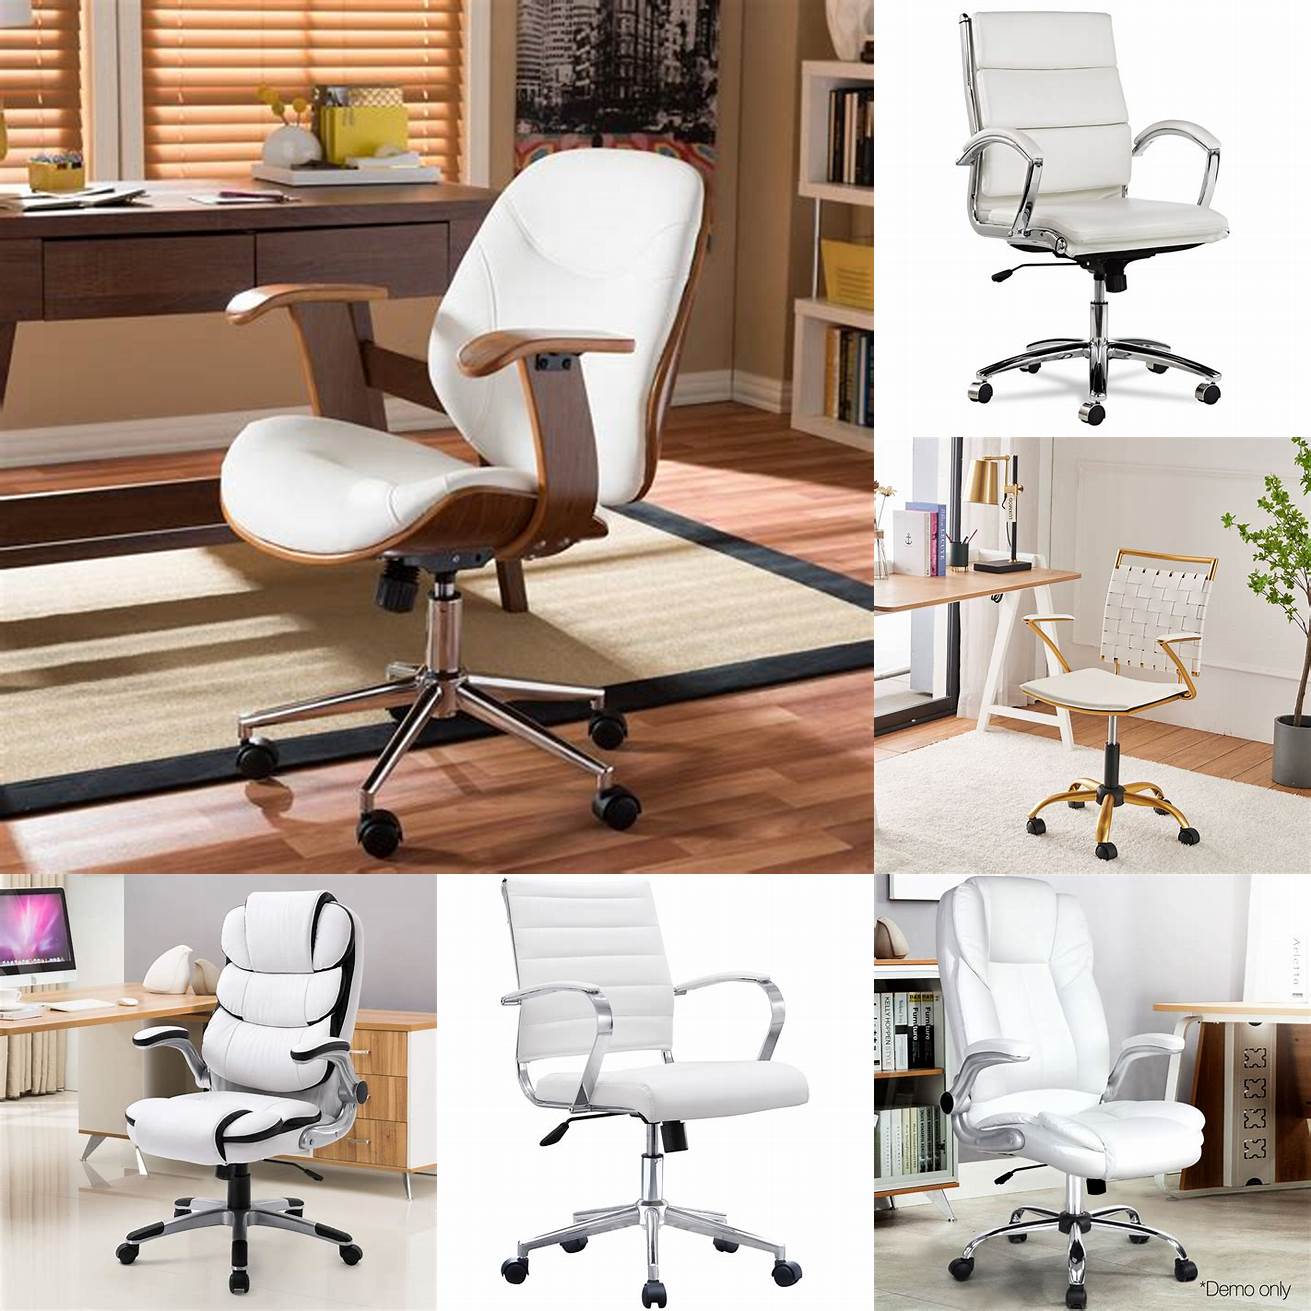 White Leather Office Chair with a wooden desk